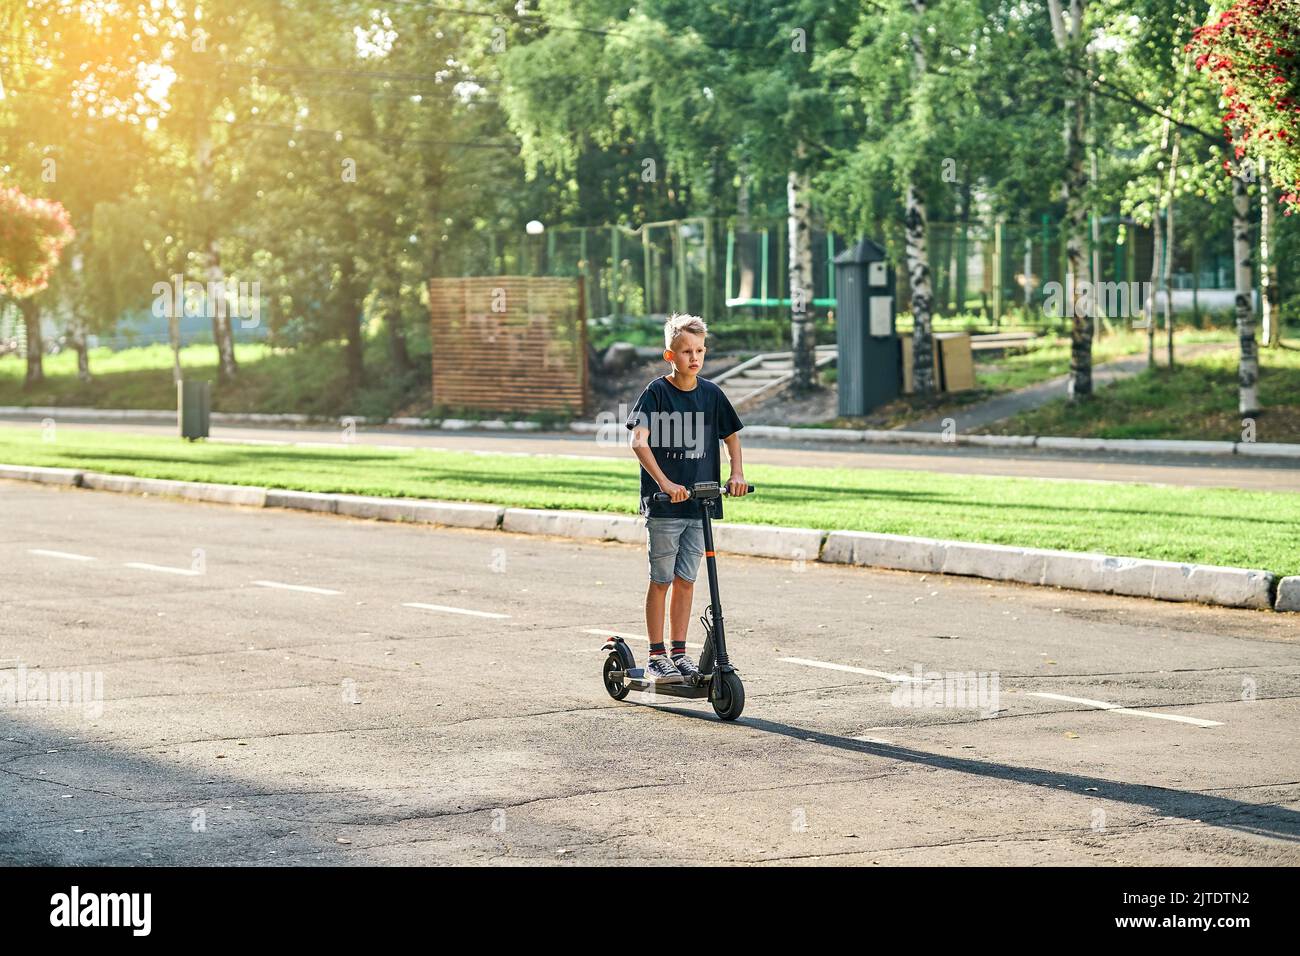 Schoolboy rides electric scooter on road in empty summer park. Child in black t-shirt and denim shorts rides on scooter along marked asphalt road Stock Photo